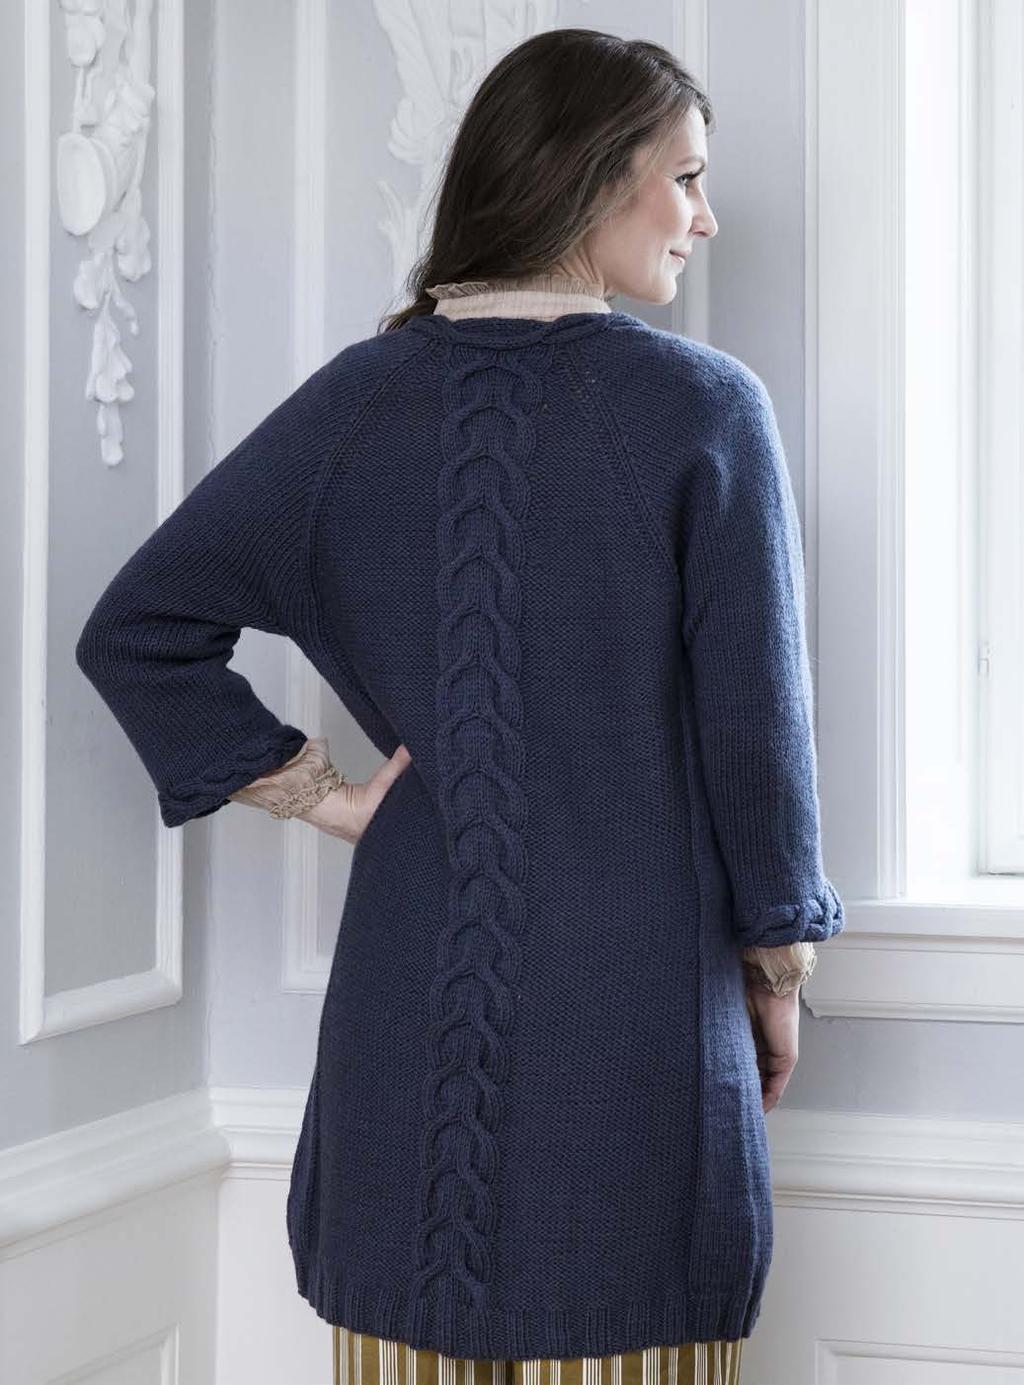 Leonora - a long cabled cardigan Design: Signe Strømgaard Leonora is part of s Colours of the Scandinavian Summer collection.